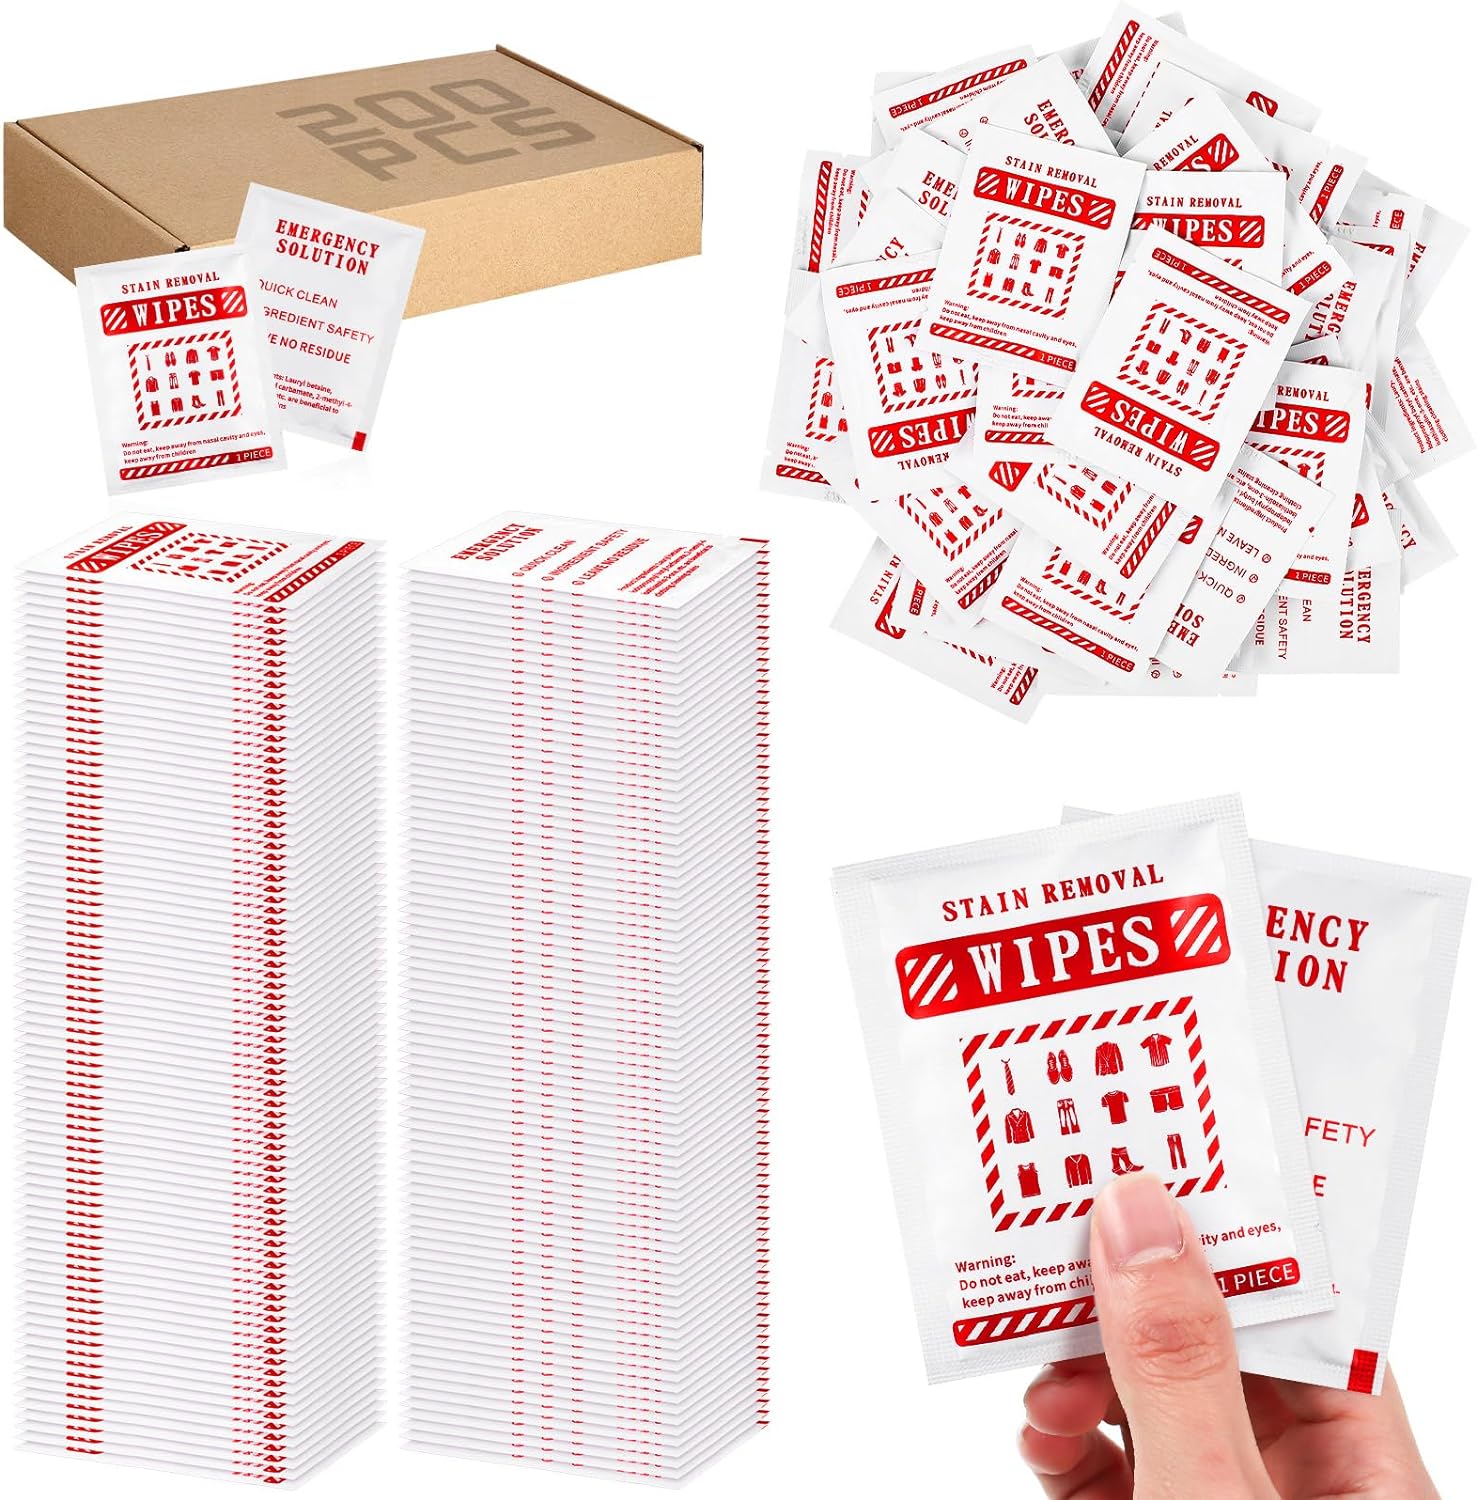 200 Pcs Stain Remover Wipes Individual Wrapped Wipes Stain Remover Mini Stain Remover Wipes for Clothes Fabric Laundry Stain Carpet Baby Messy Eater Car Seat Upholster (White)